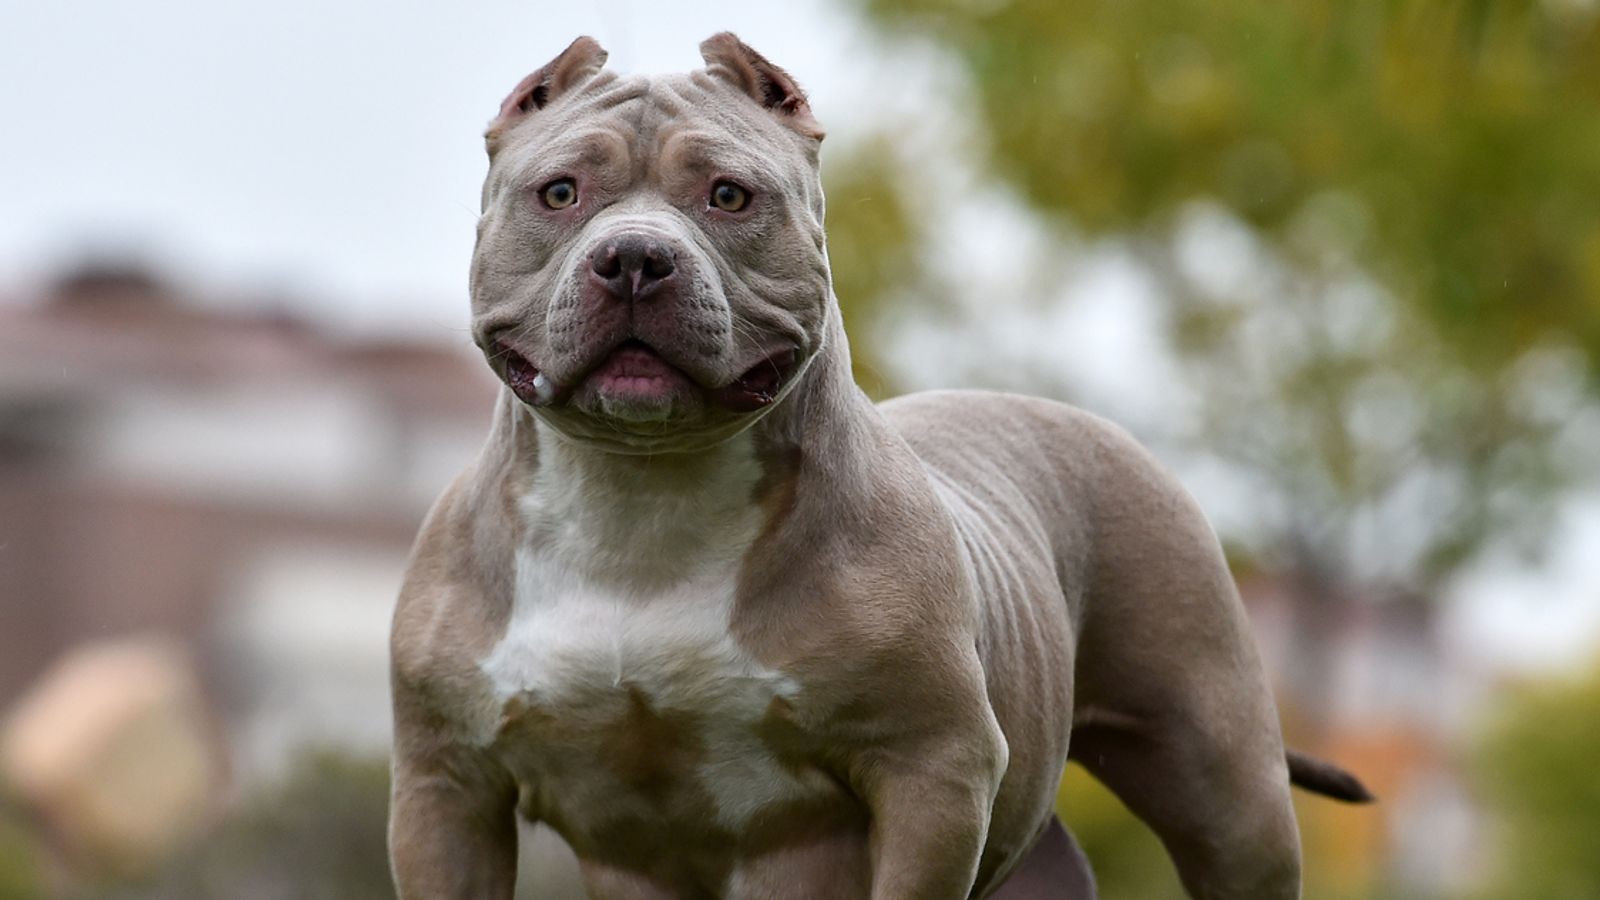 American XL bully dogs to be banned after attacks, Rishi Sunak